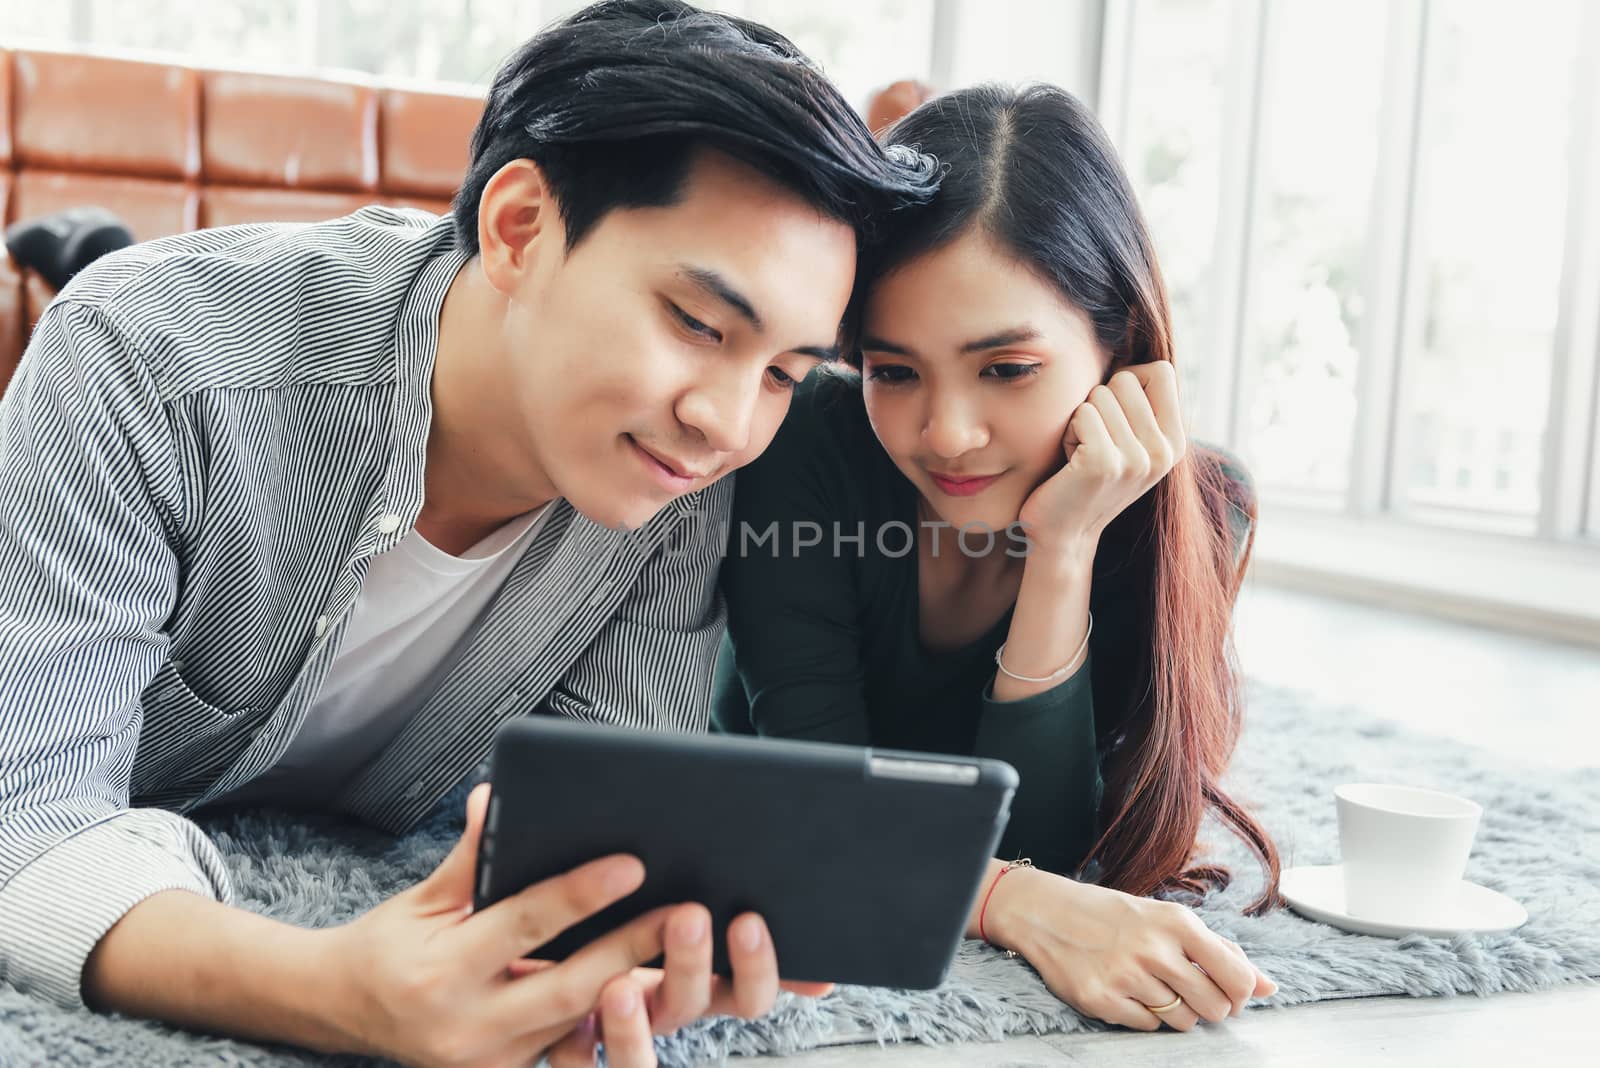 Young Couple Love Relax Enjoyment While Online Shopping on Electronic Tablet in Living Room, Portrait of Asian Couple Relaxing on a Couch During Shopping Online Togetherness. Relaxation/ Lifestyle by MahaHeang245789